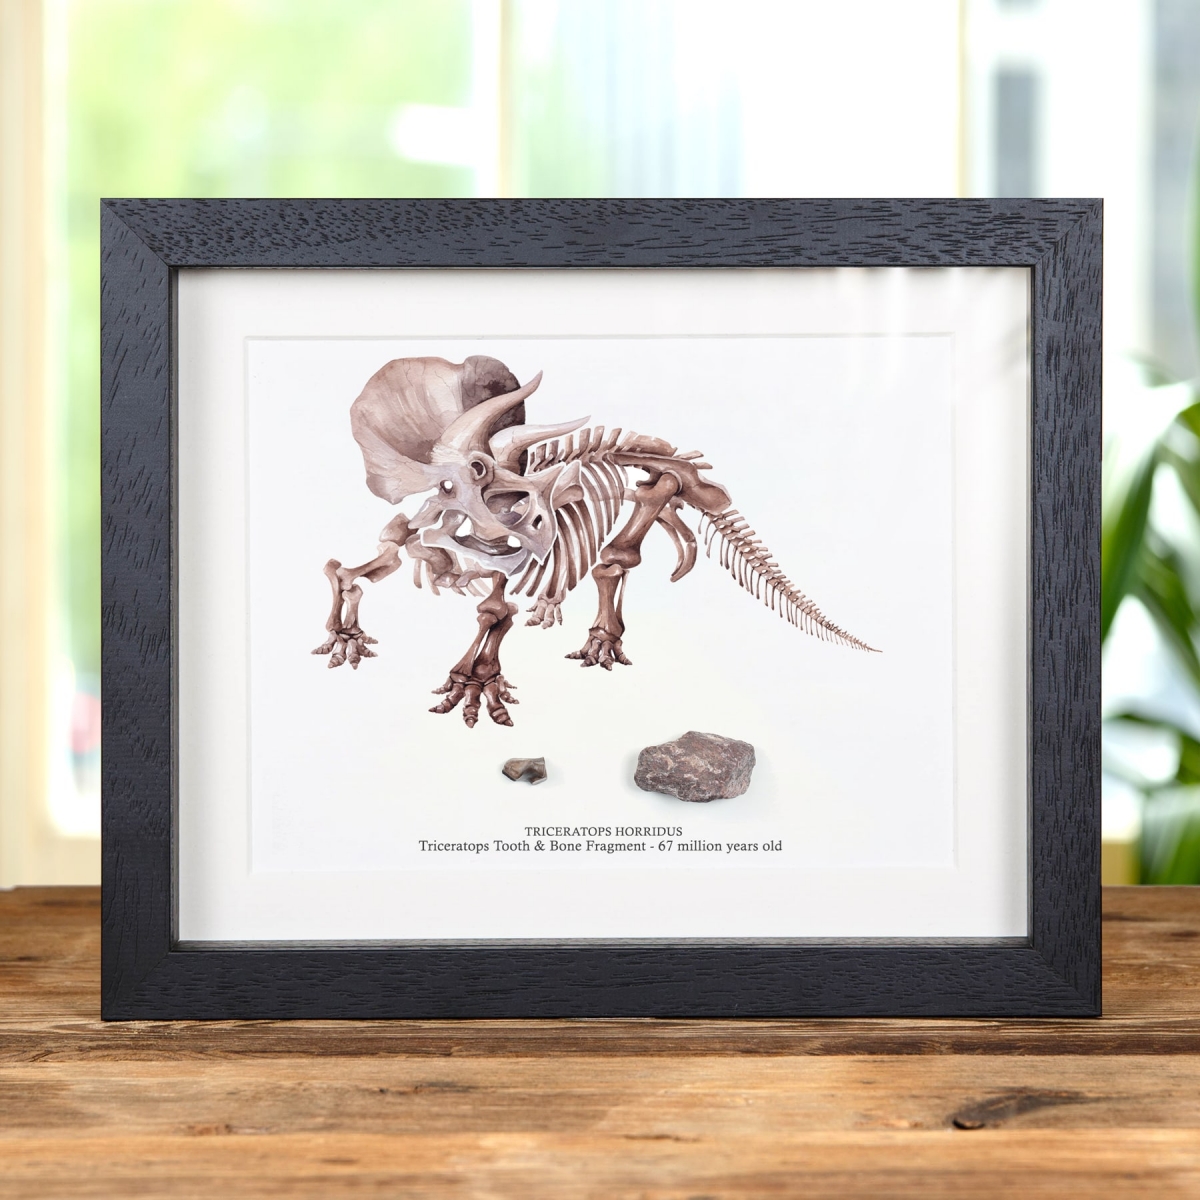 Minibeast Triceratops Tooth & Bone Fragment with Illustration In Box Frame (Triceratops horridus)